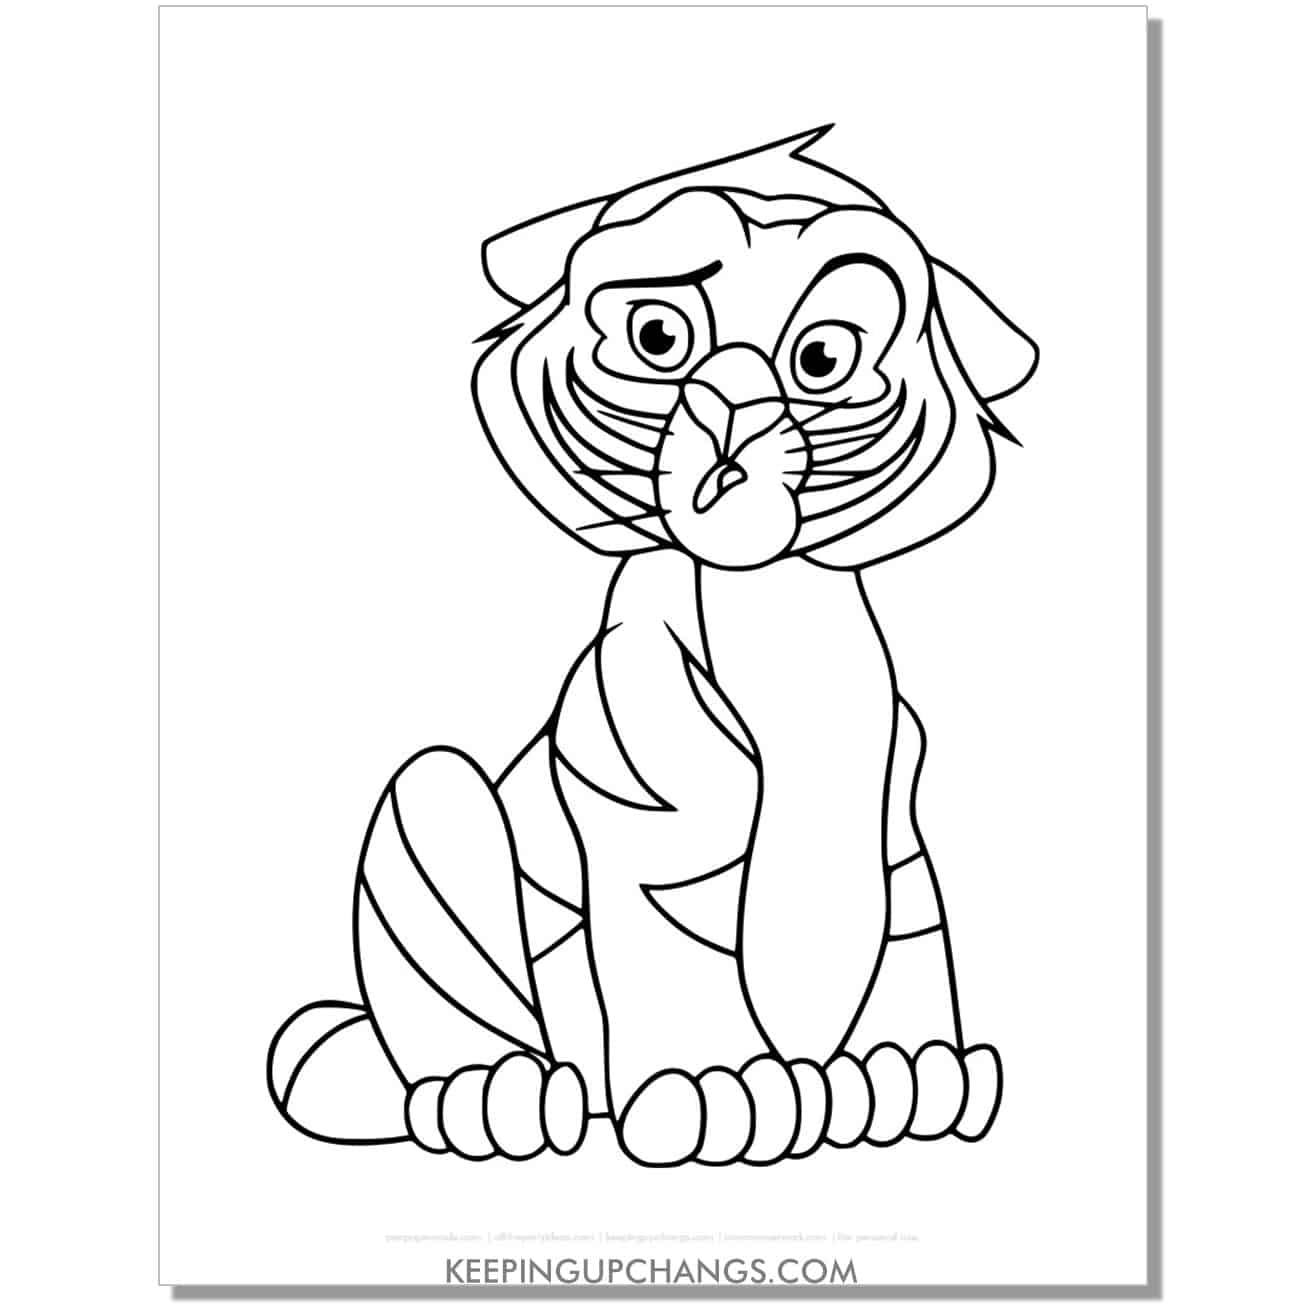 rajah cub with confused look coloring page, sheet.